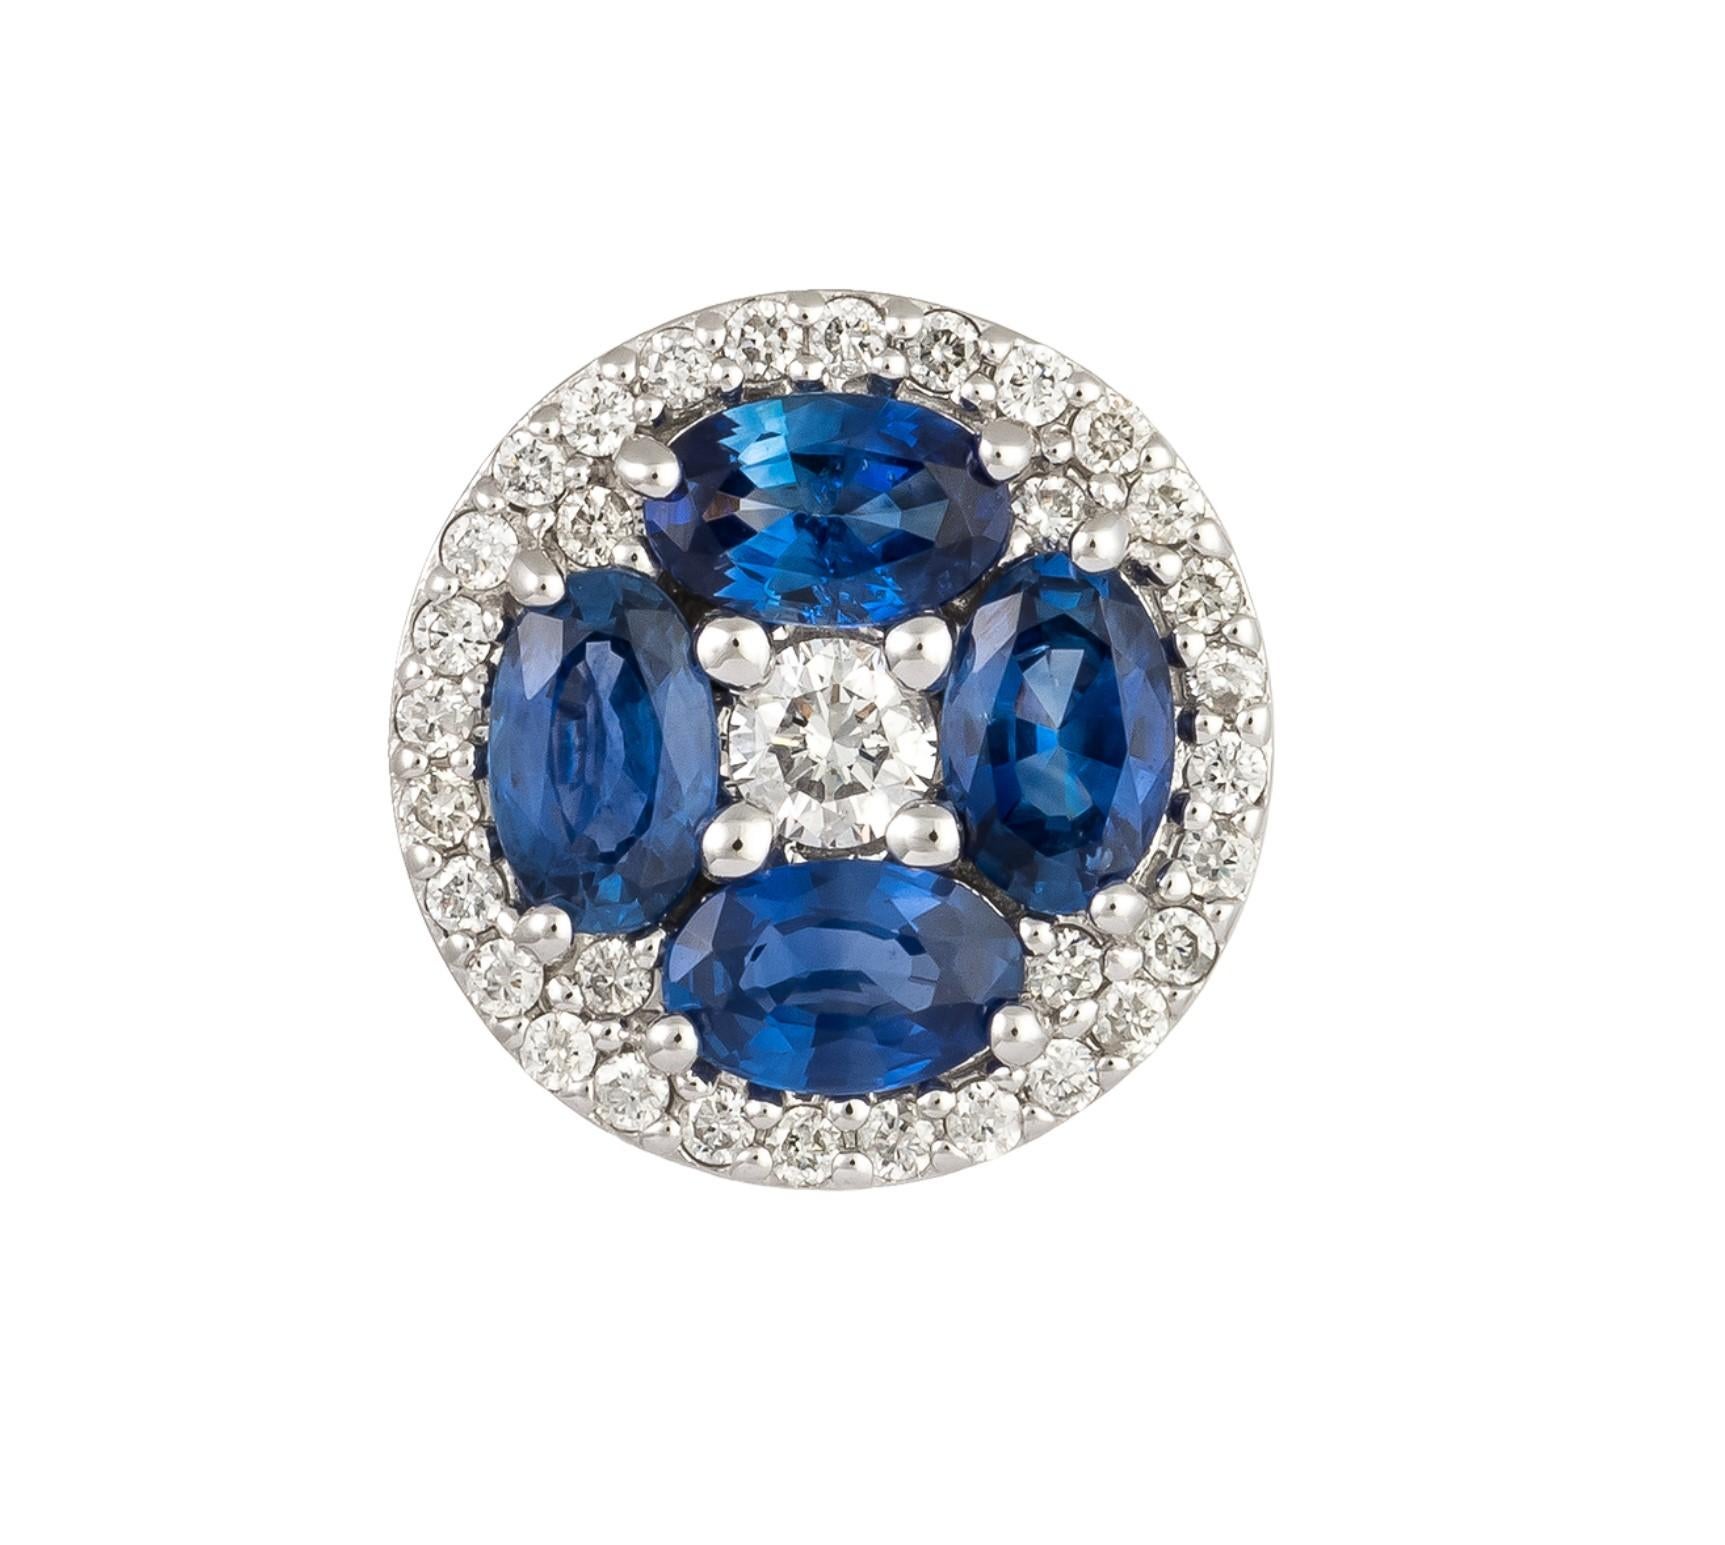 The Following Item we are offering is a Rare Important Radiant 18KT Gold Large Rare Gorgeous Fancy Blue Sapphire and Diamond Floral Stud Earrings. Earrings are comprised of Beautiful Glittering Sapphires and Gorgeous Diamonds!!! T.C.W. Approx